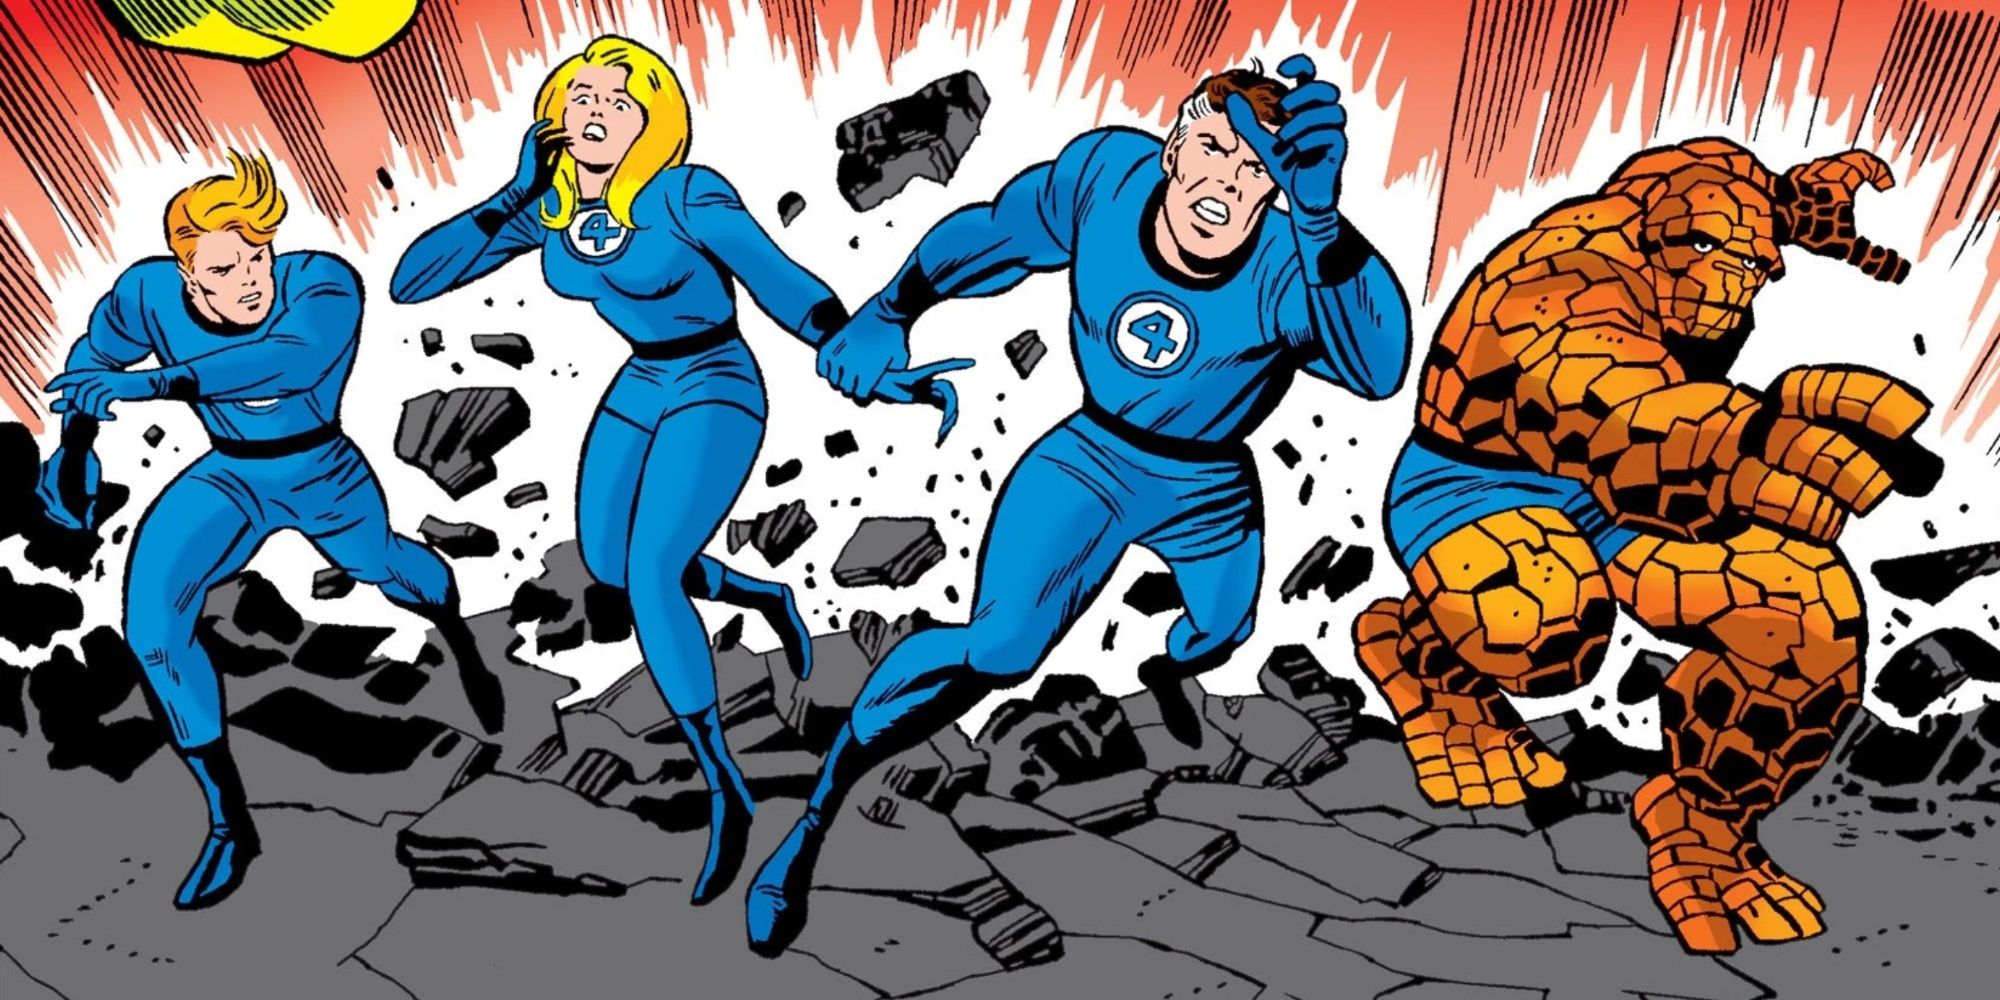 fantastic four battling galactus on the cover of issue #49